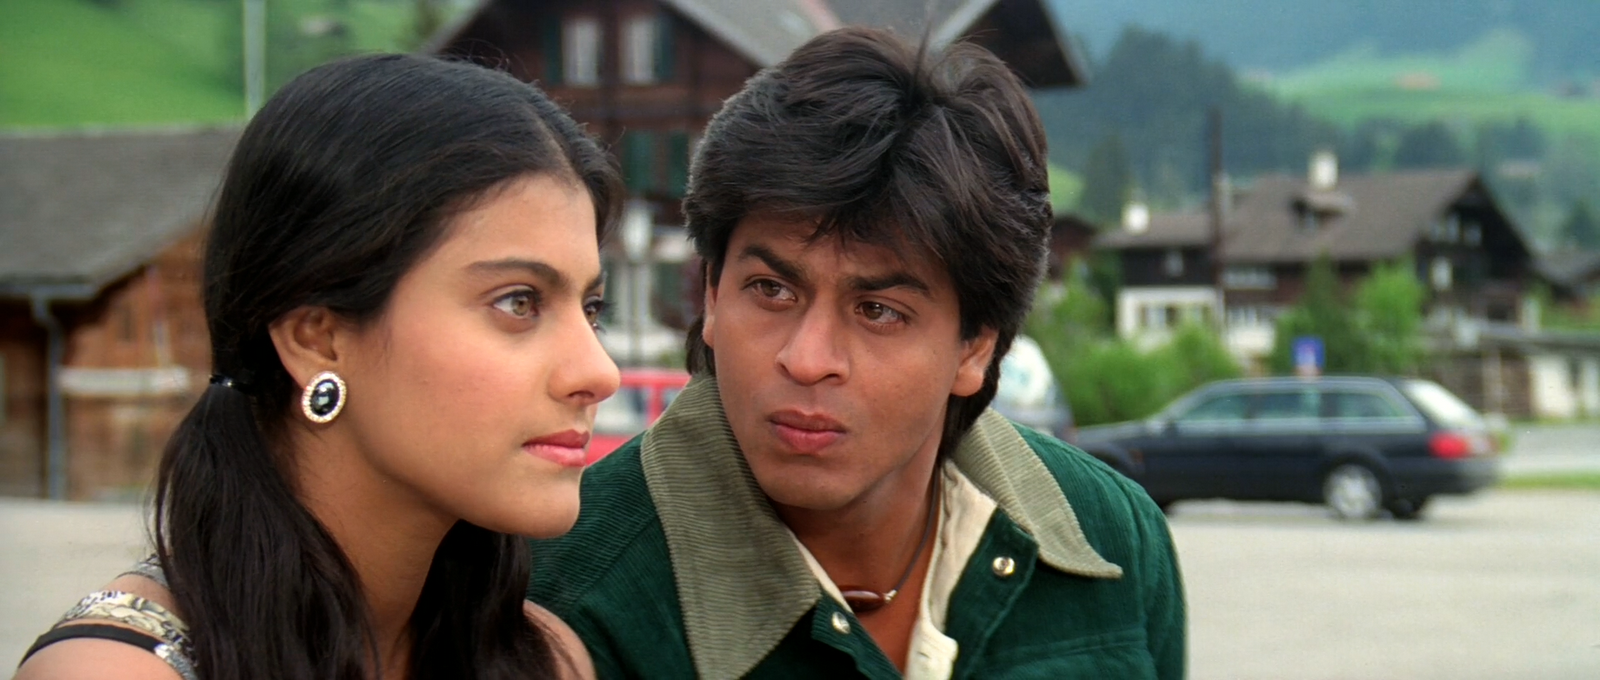 Dilwale dulhania le jayenge hd mp4 movie free download mp3